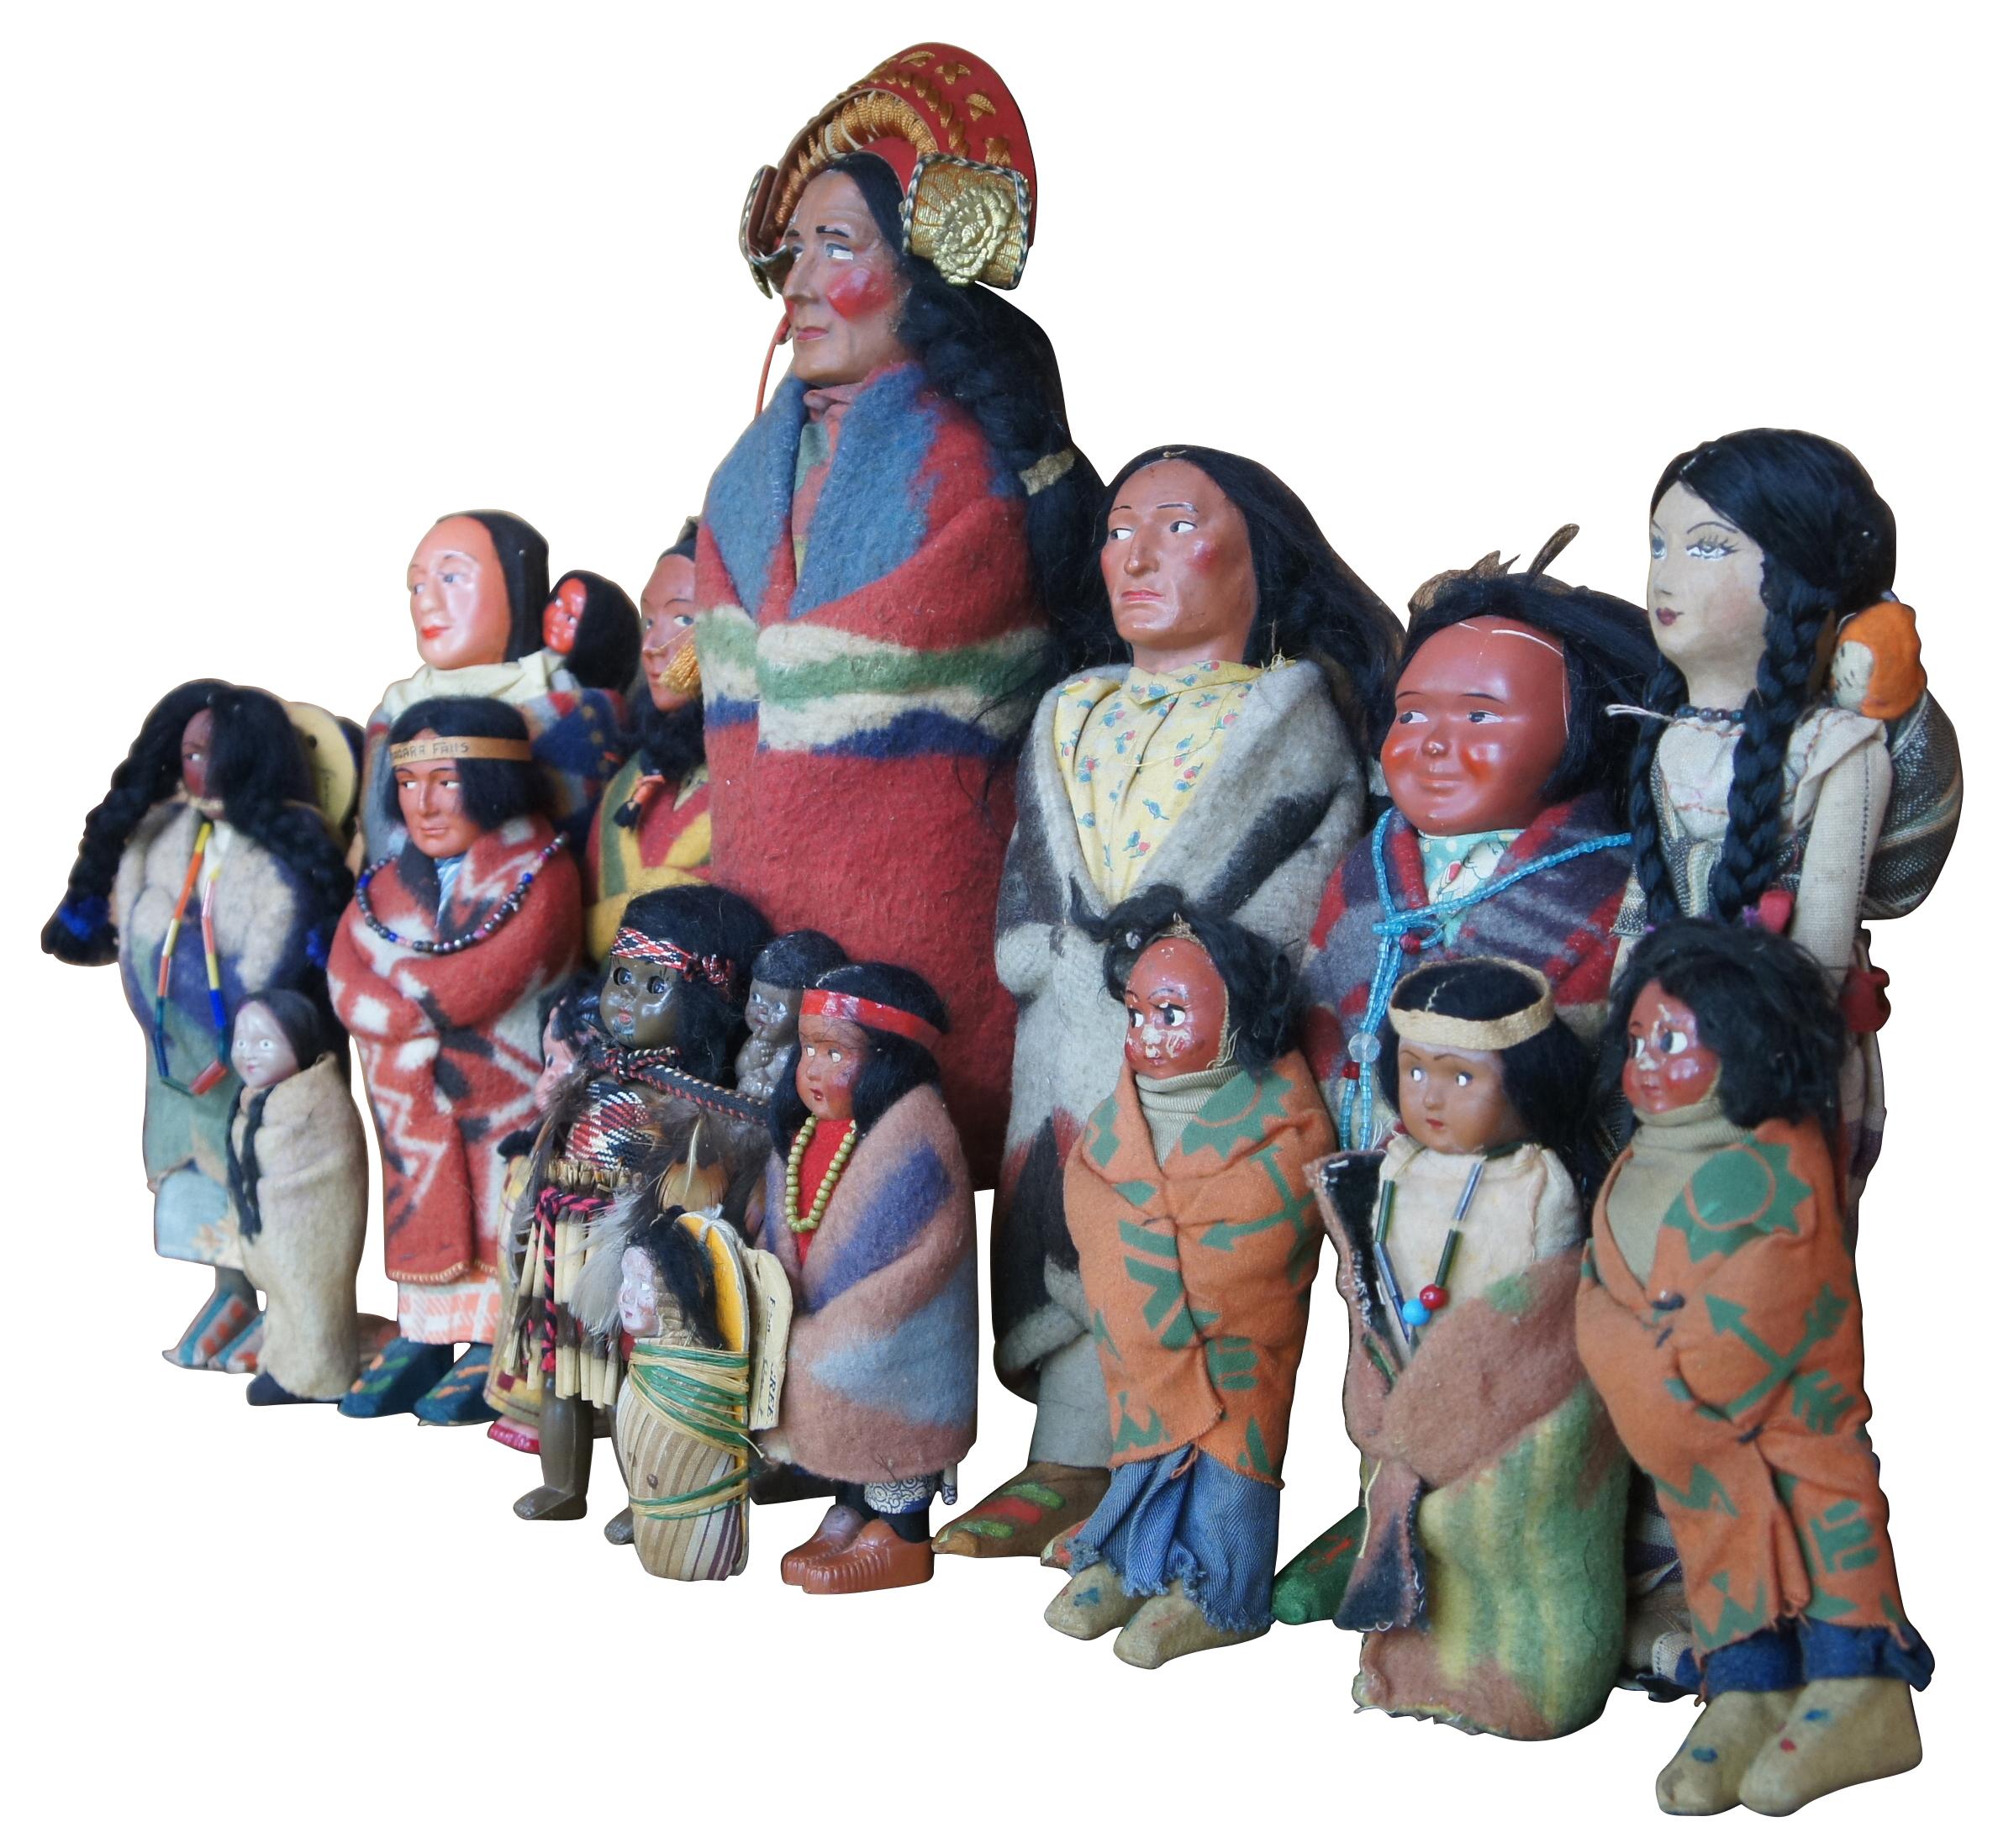 Lot of 16 antique Native American Skookum dolls featuring men, women, children and babies wearing traditional wool clothing with beaded accents, headdresses and tapestry blankets.

largest- 5